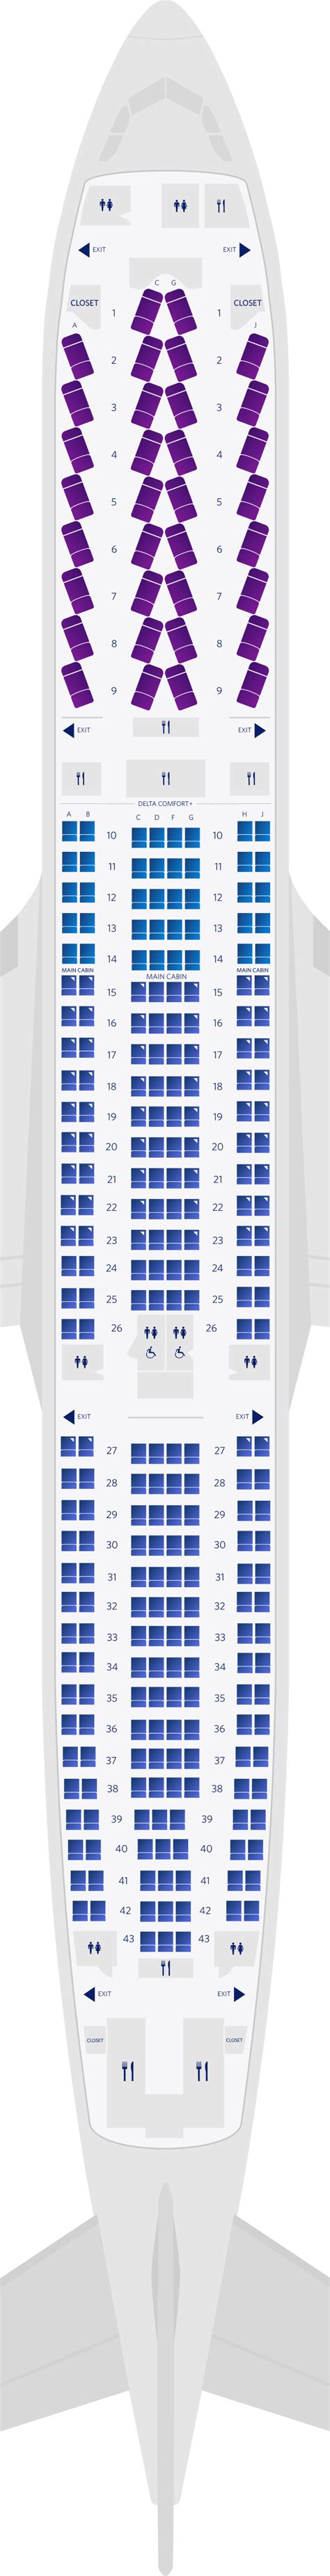 Airbus A Seat Map Two Birds Home